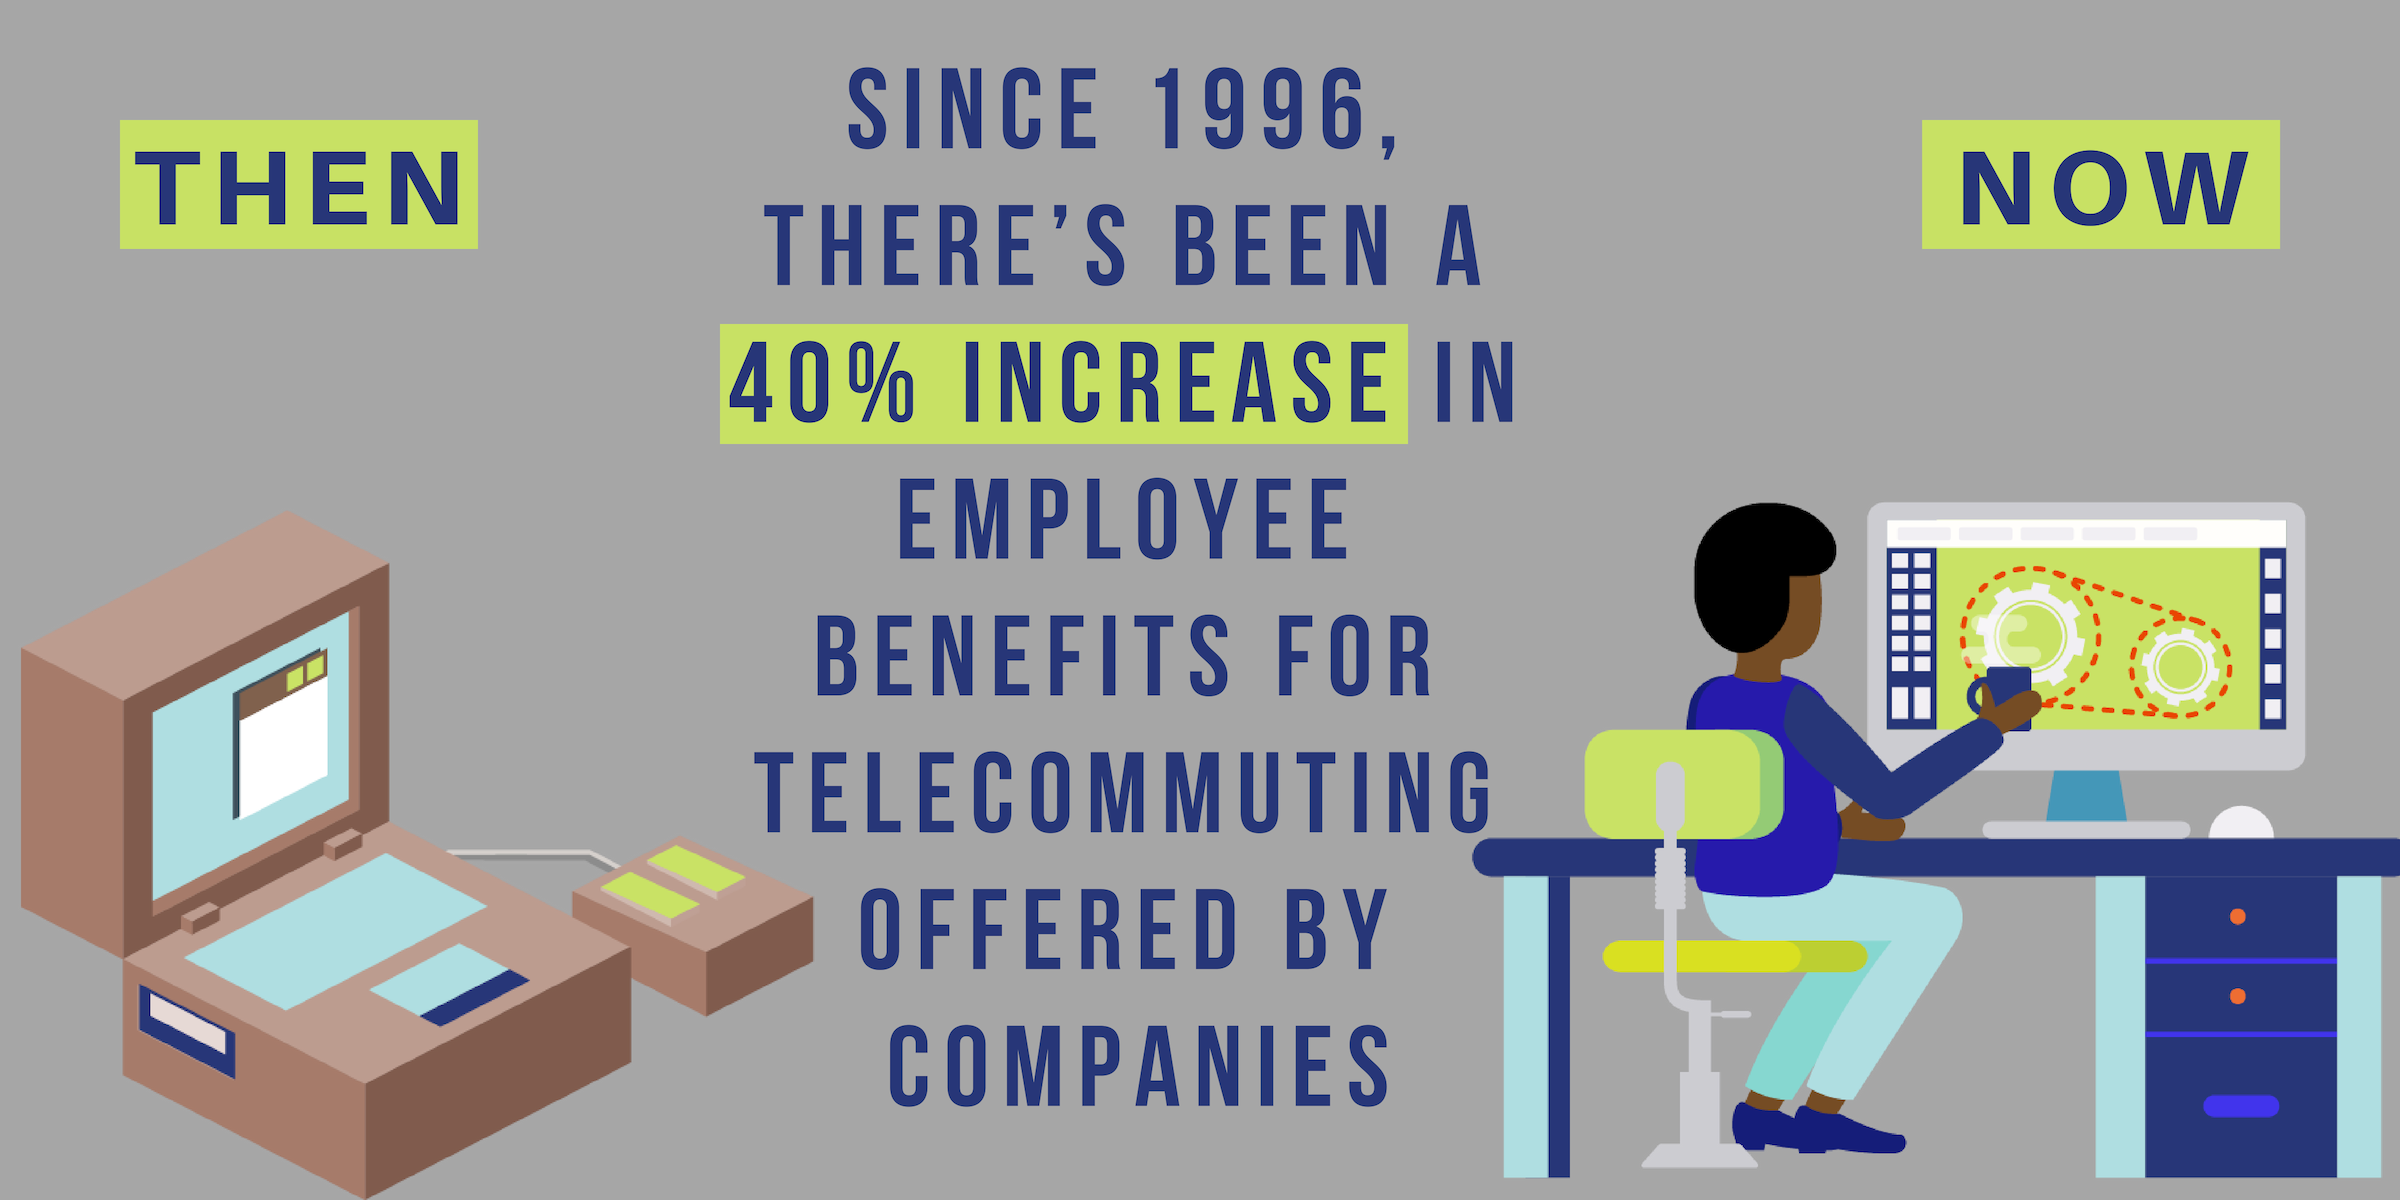 Since 1996, there's been a 40% increase in employee benefits for telecommuting offered by companies